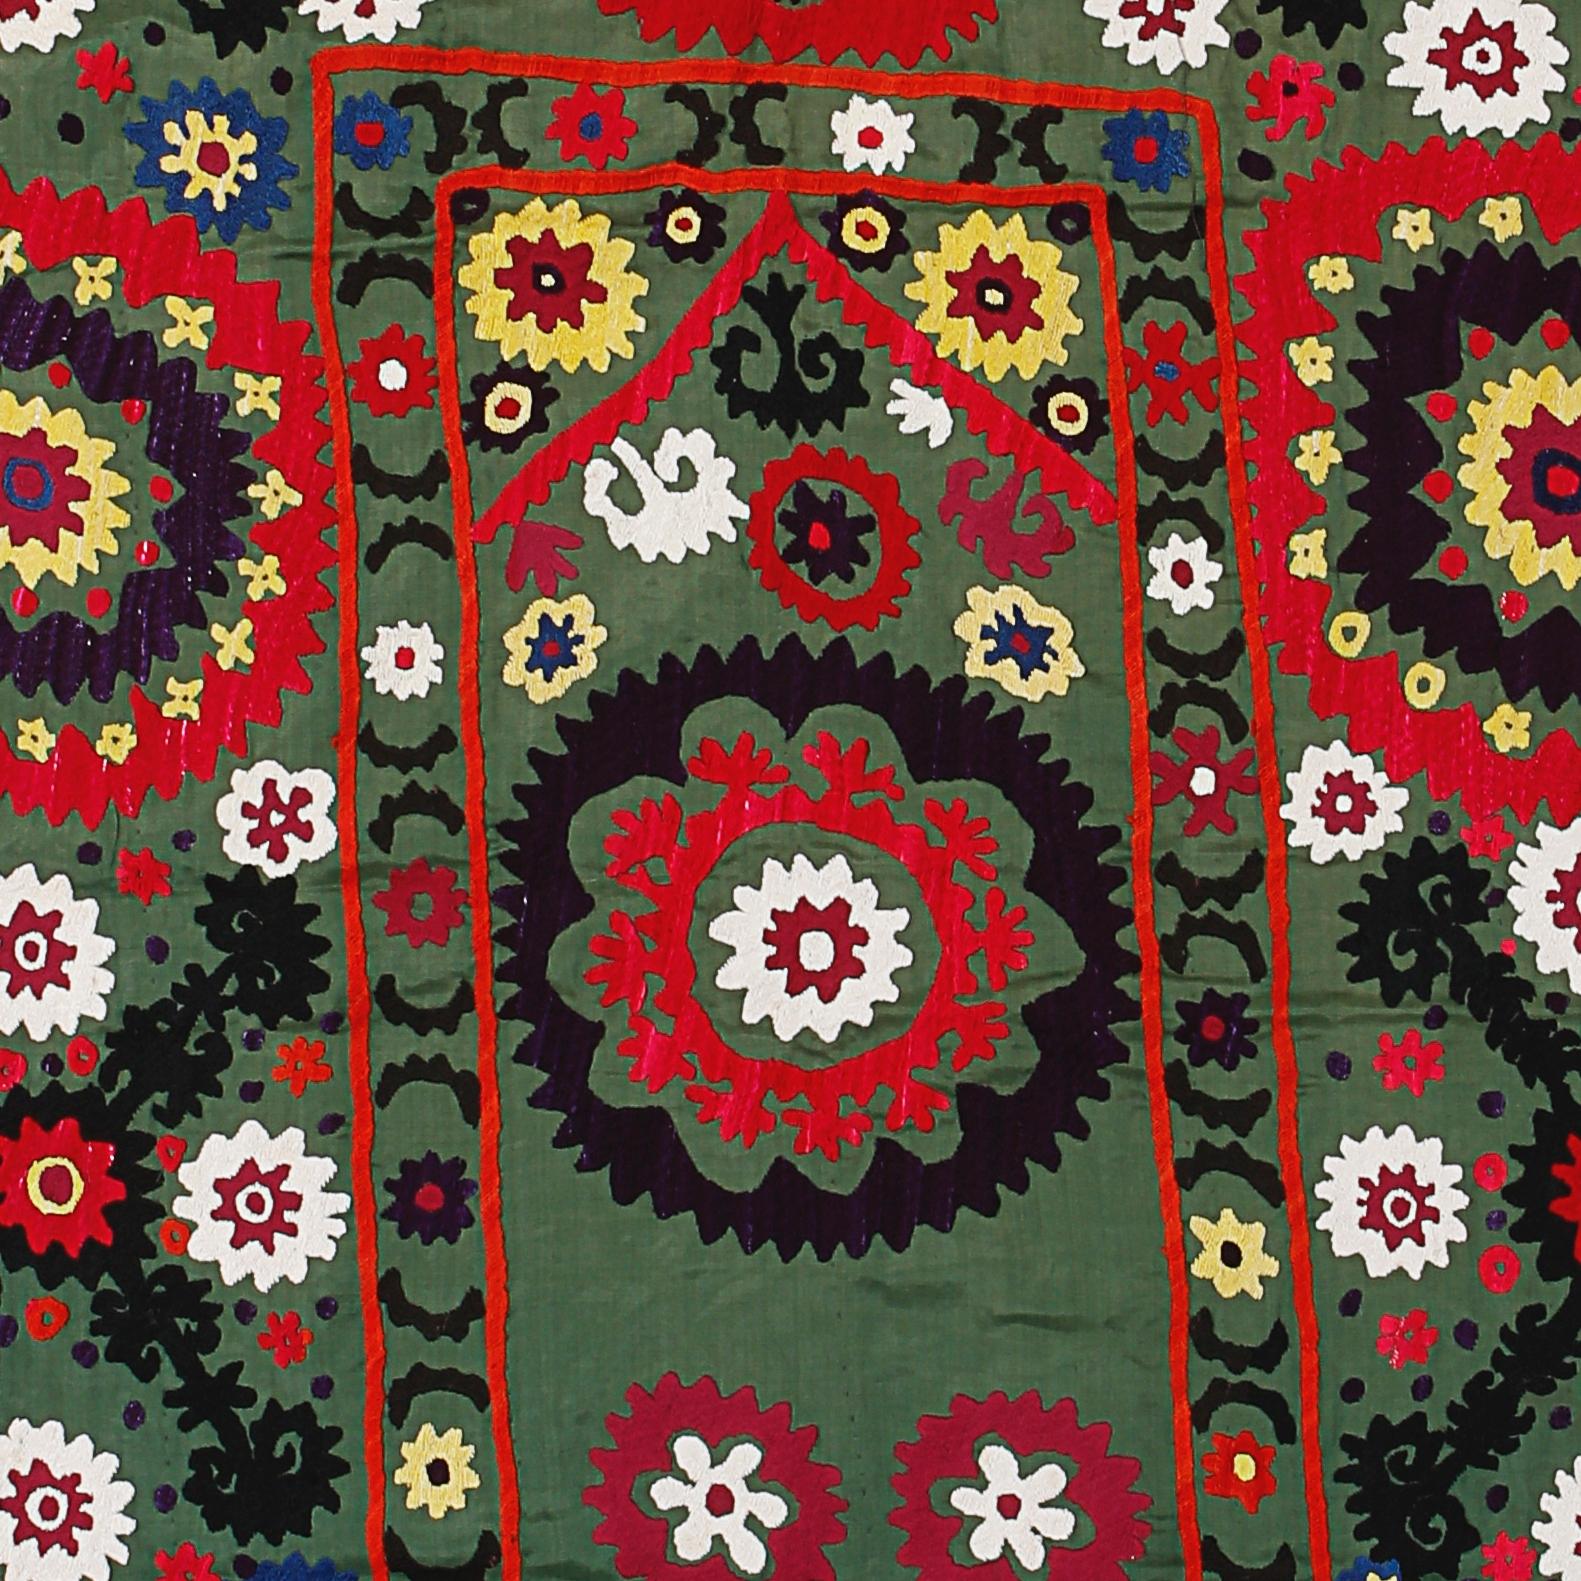 Uzbek 3.5x5 ft Silk Embroidery Wall Hanging in Forest Green, Floral Suzani Tablecloth For Sale